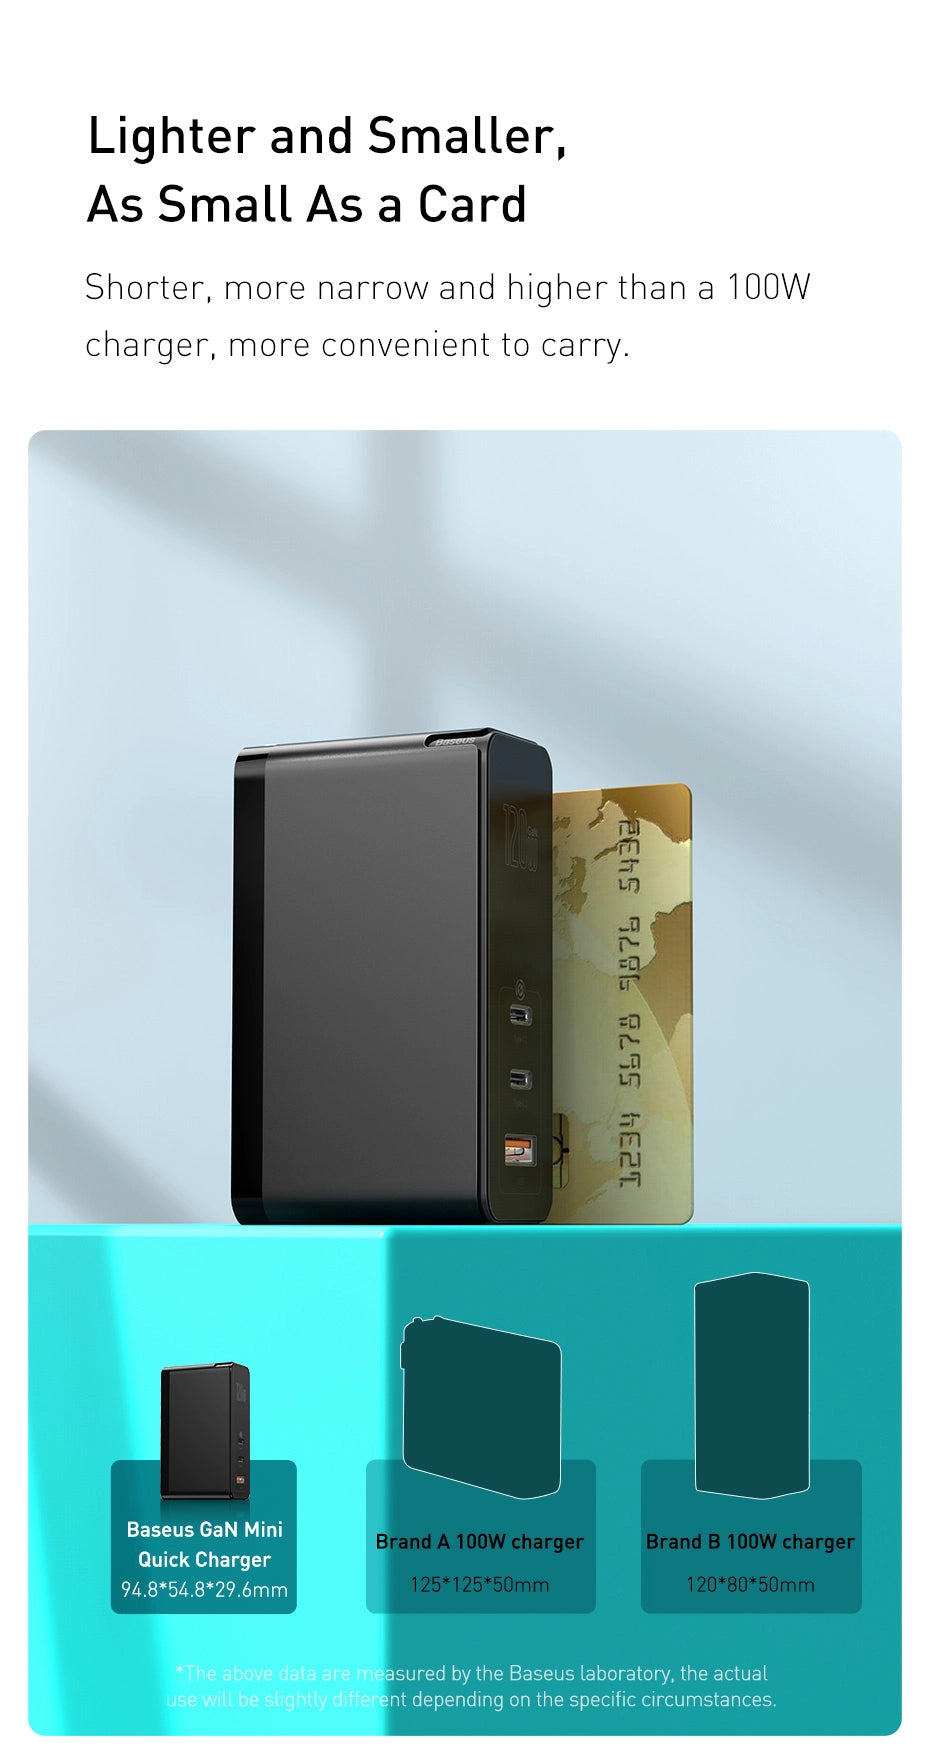 Lighter and Smaller, As Small As a Card Shorter, more narrow and higher than a 100W charger, more convenient to carry.